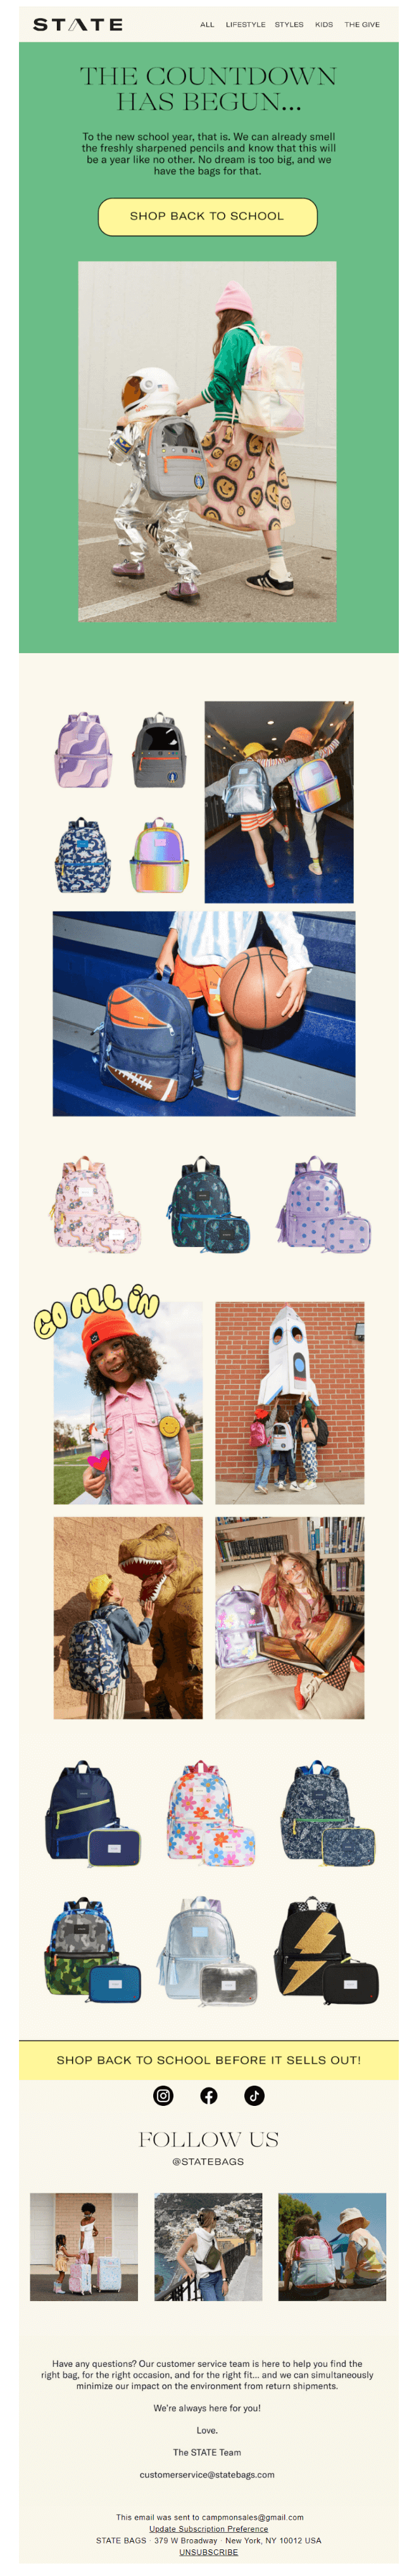 Email from State that features pictures of colorful backpacks and child and teenage models wearing them